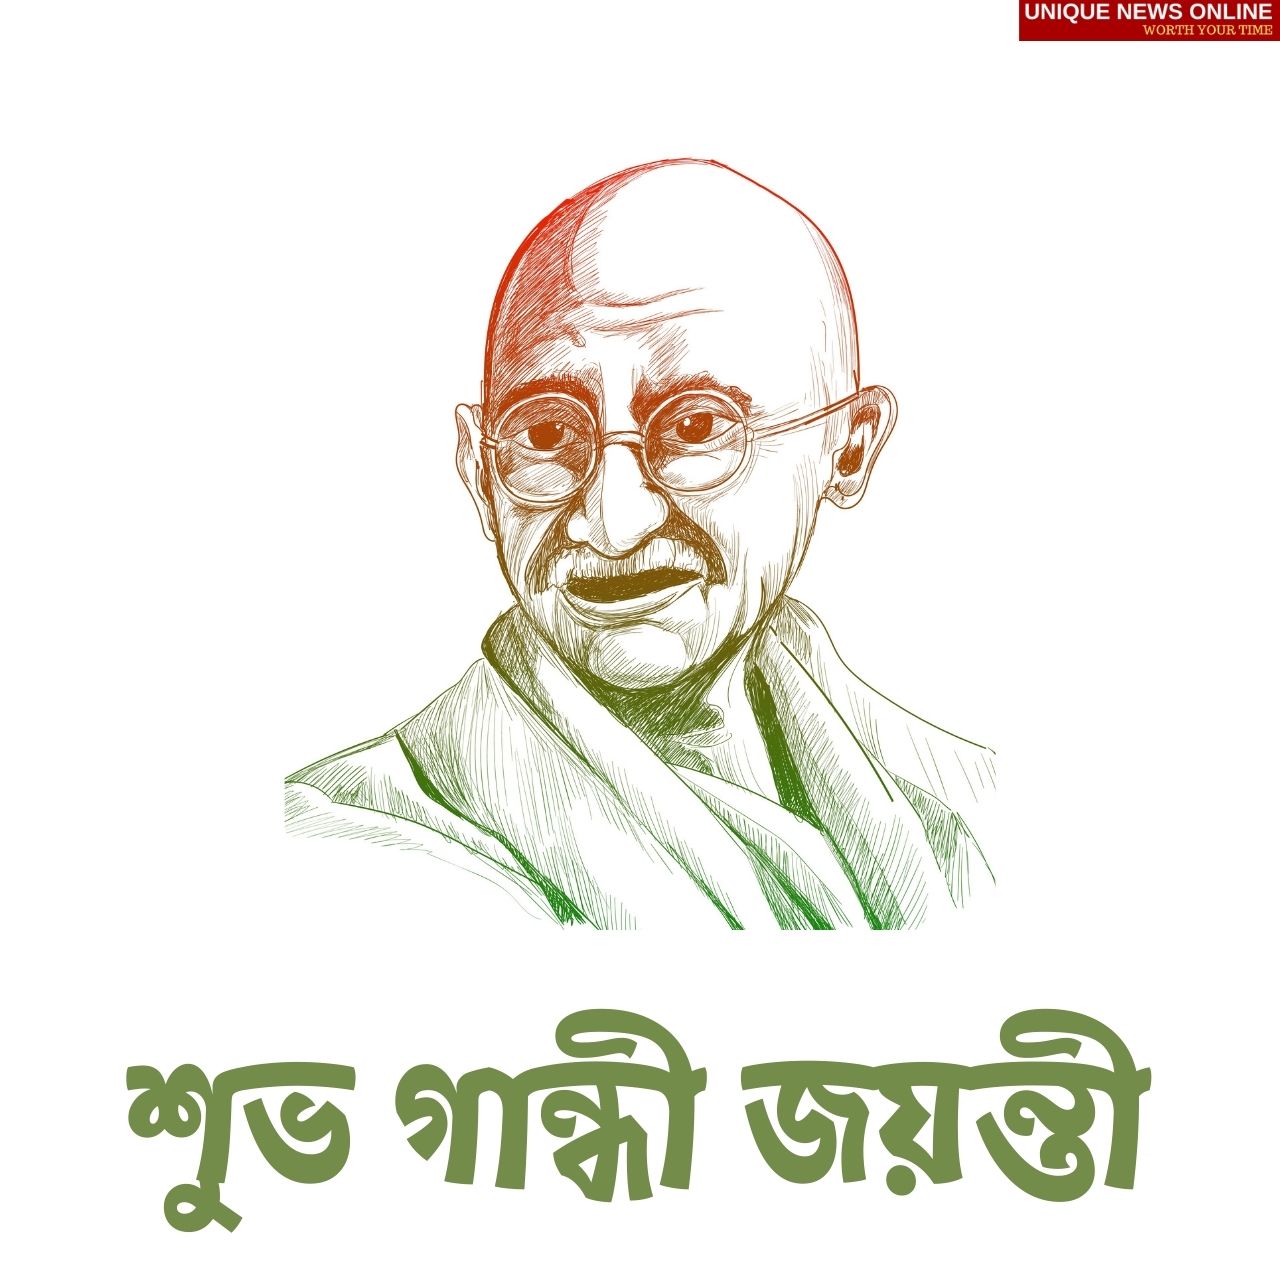 Gandhi Jayanti 2021 Bengali Wishes, Quotes, Messages, Wishes, Greetings, and HD Images to share